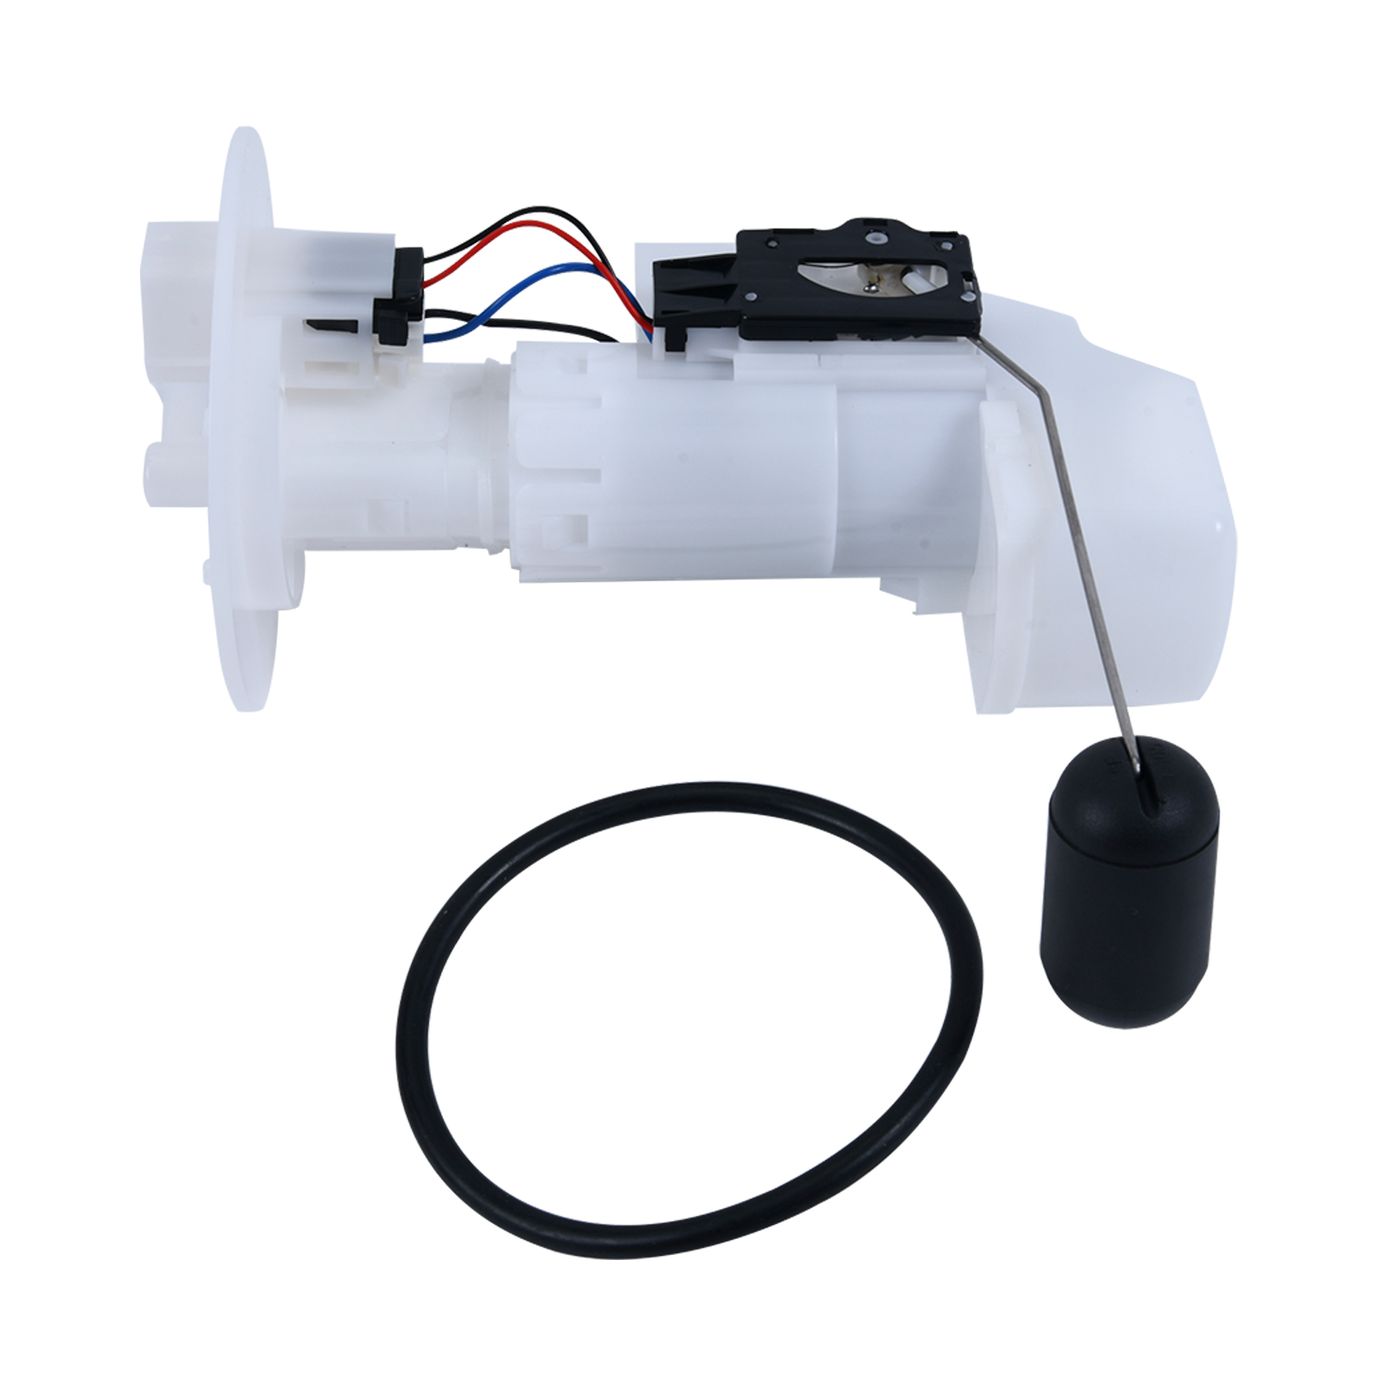 Wrp Fuel Pump Modules - WRP471030 image